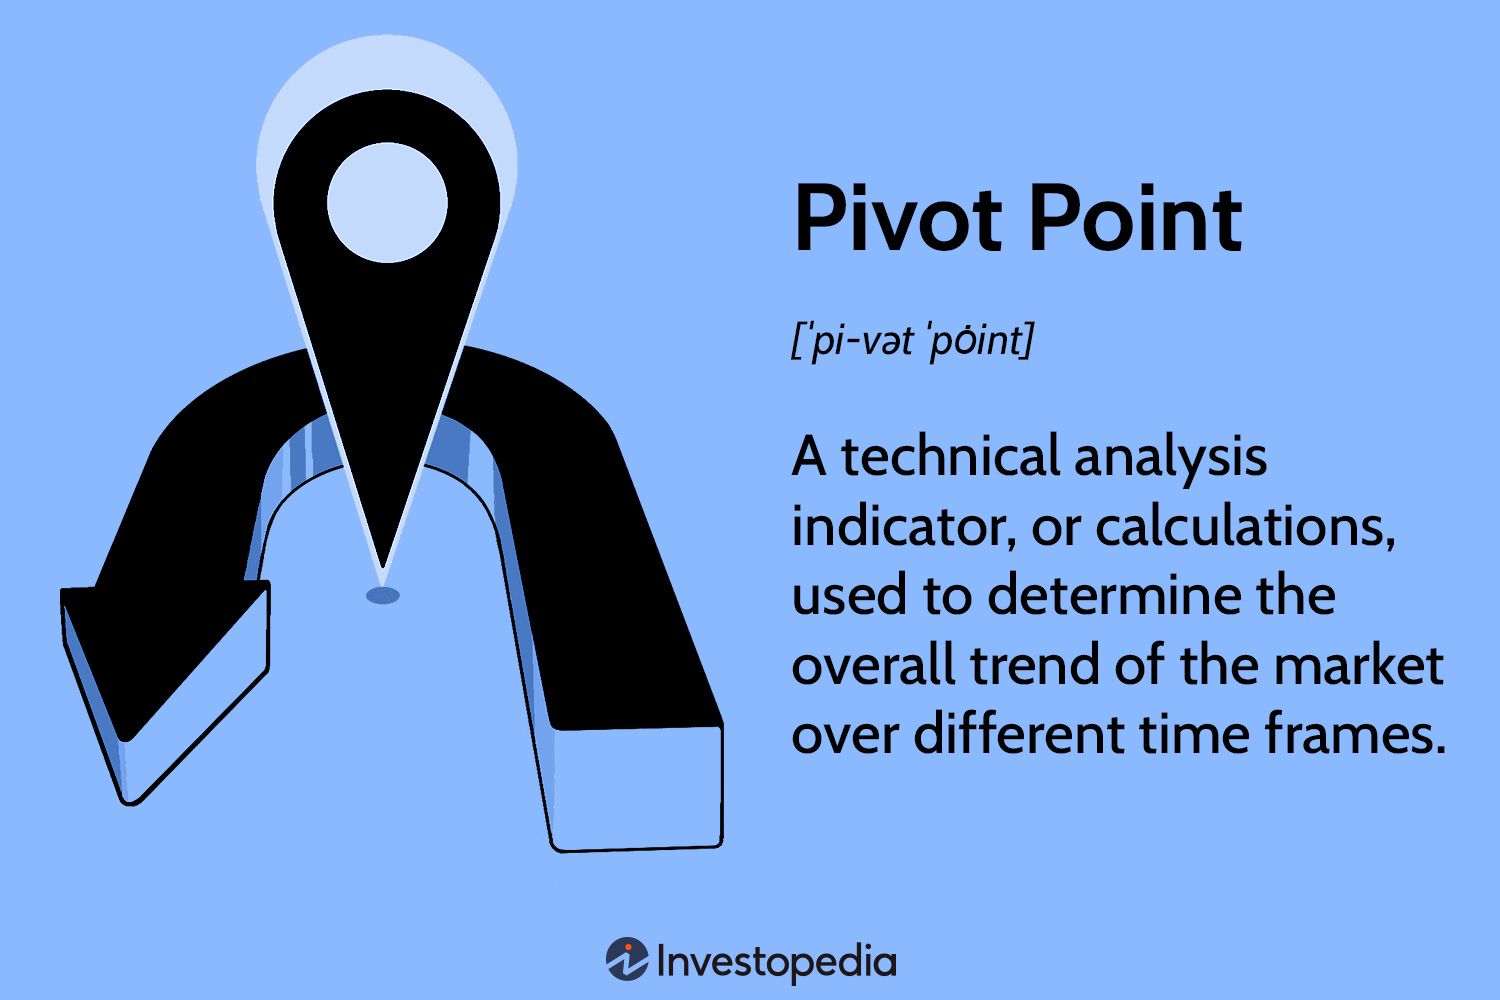 Pivot Point: Definition, Formulas, and How to Calculate